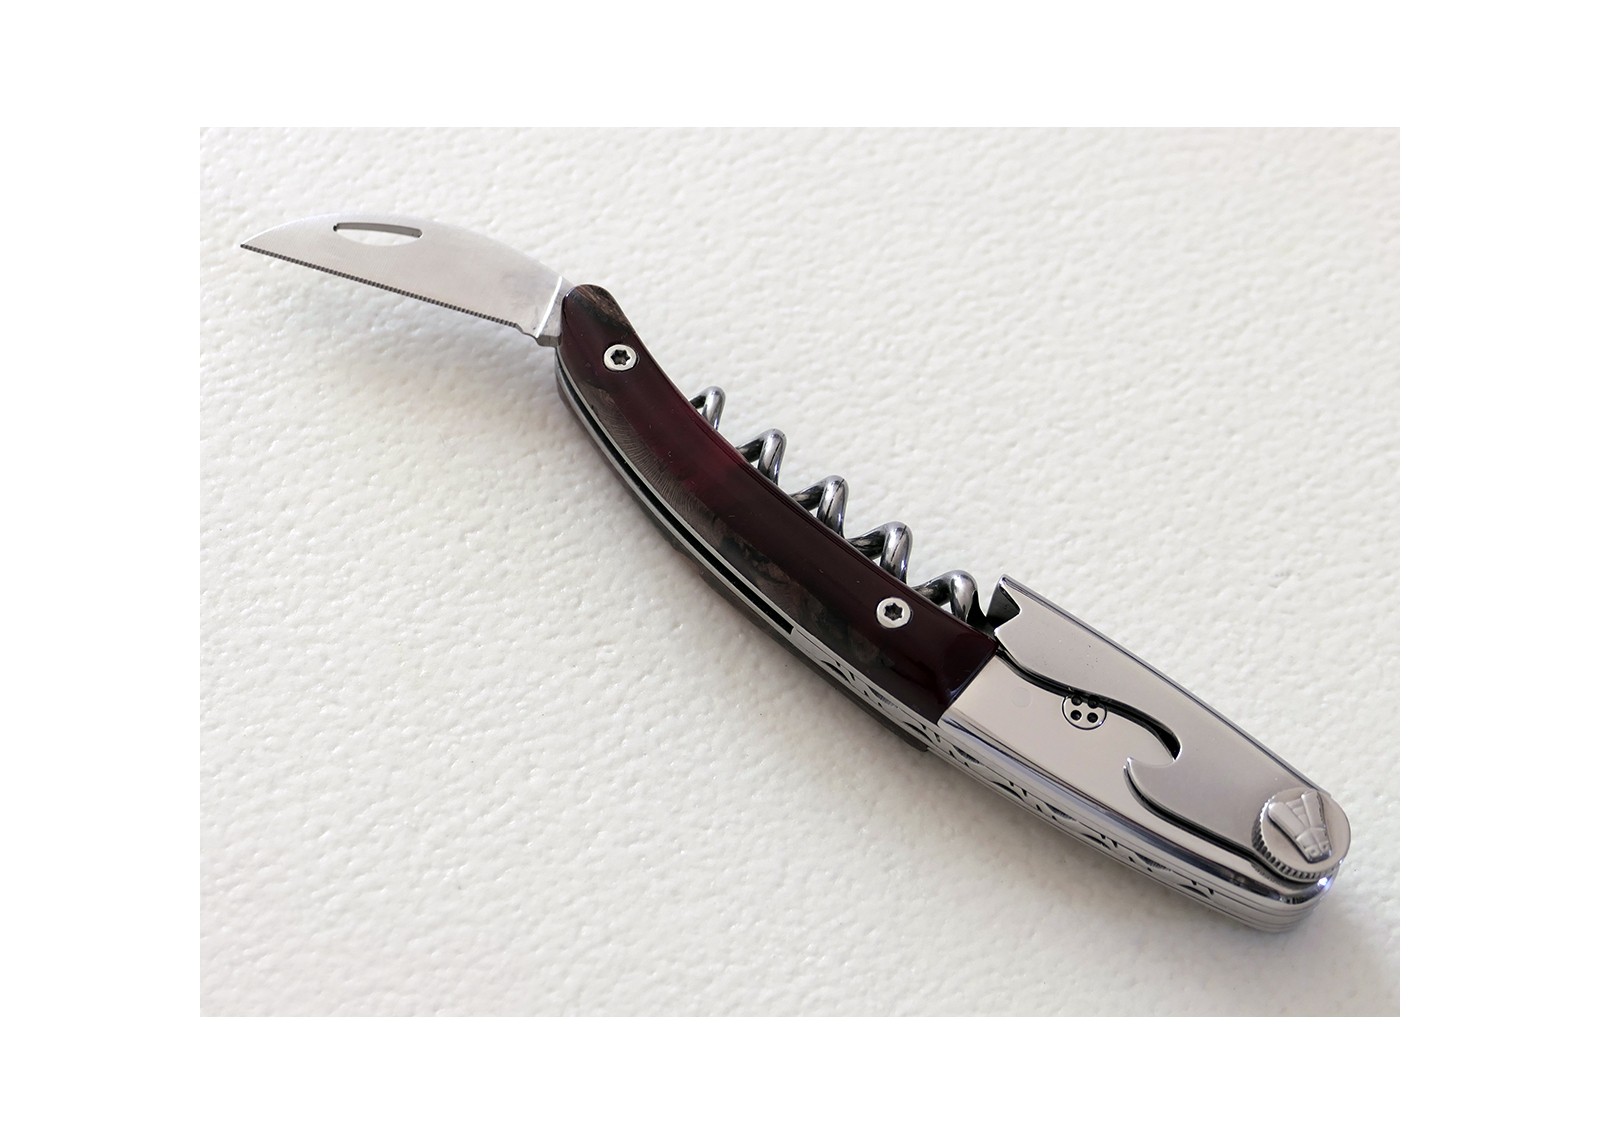 https://laguiole-17592.kxcdn.com/20209-large_default/laguiole-corkscrew-with-resin-and-vine-splinters-handle-and-stainless-steel-bolster.jpg